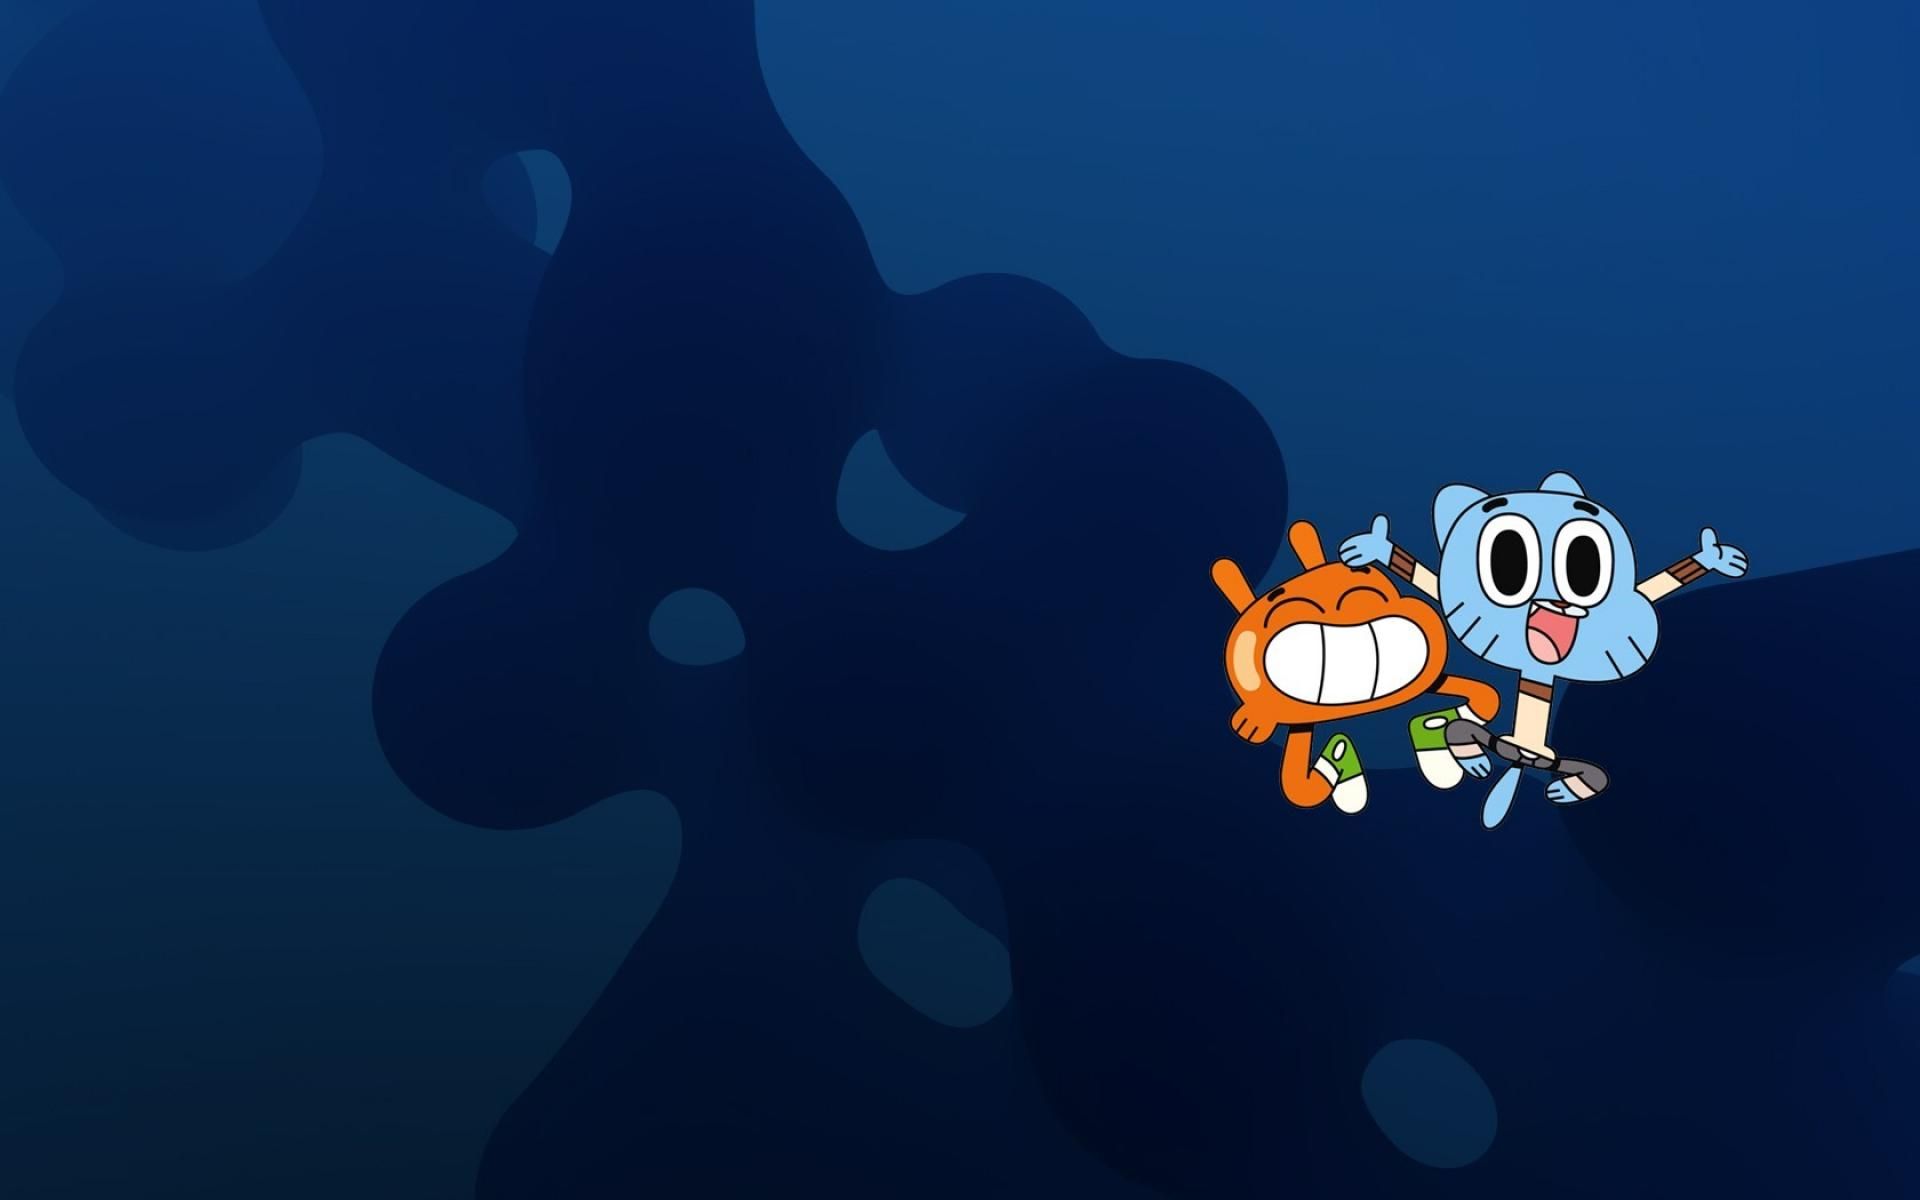 Best 51+ Amazing World of Gumball Wallpapers on HipWallpapers.